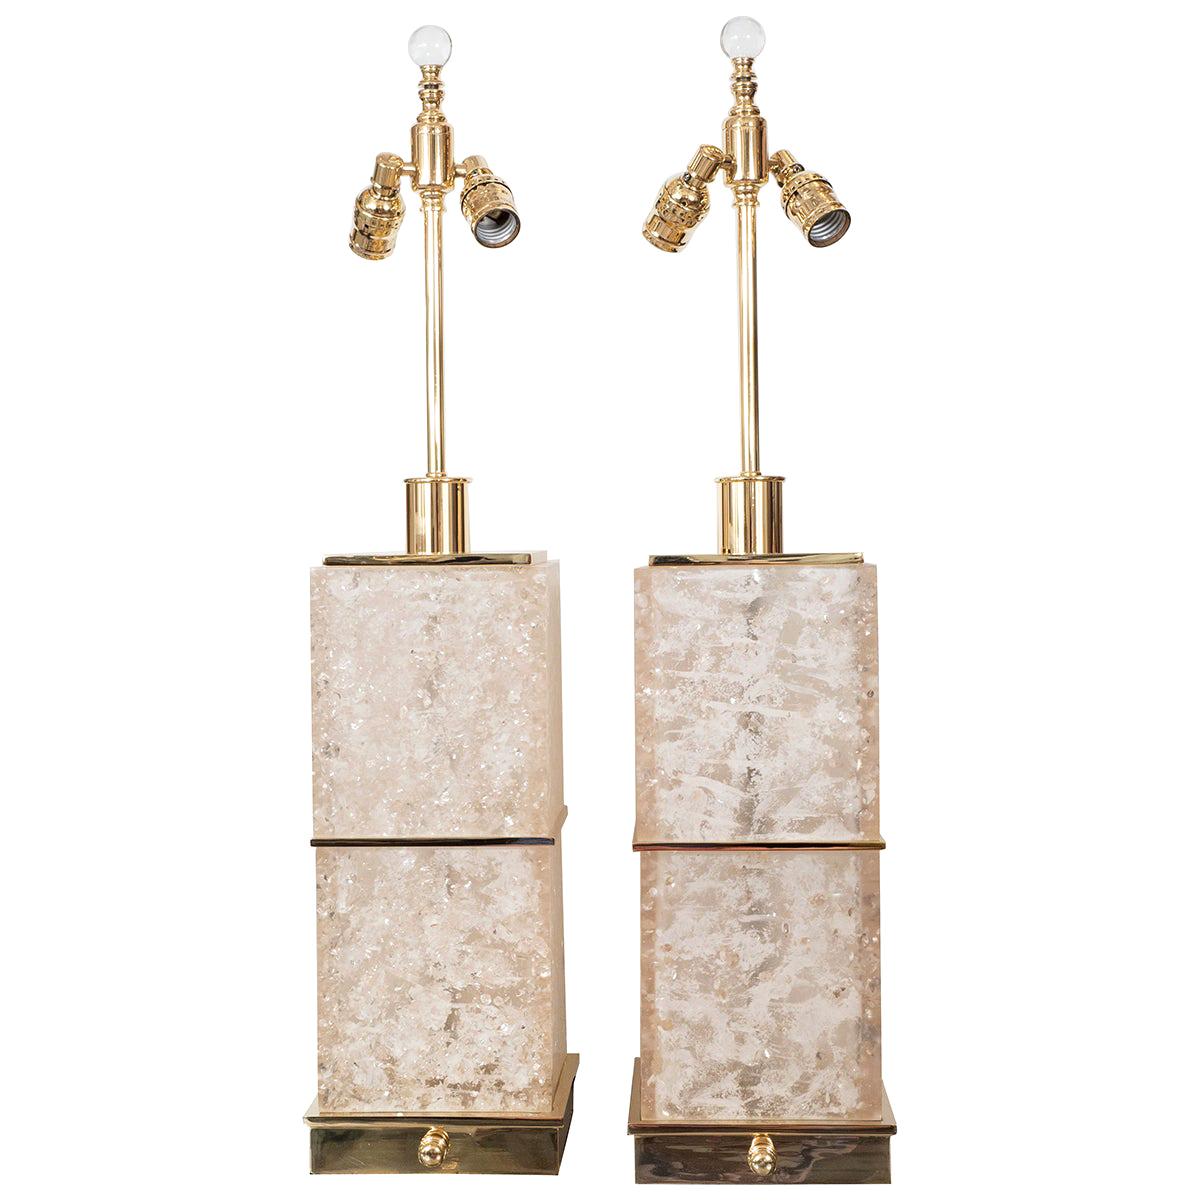 Pair of Fractured Resin and Brass Table Lamps